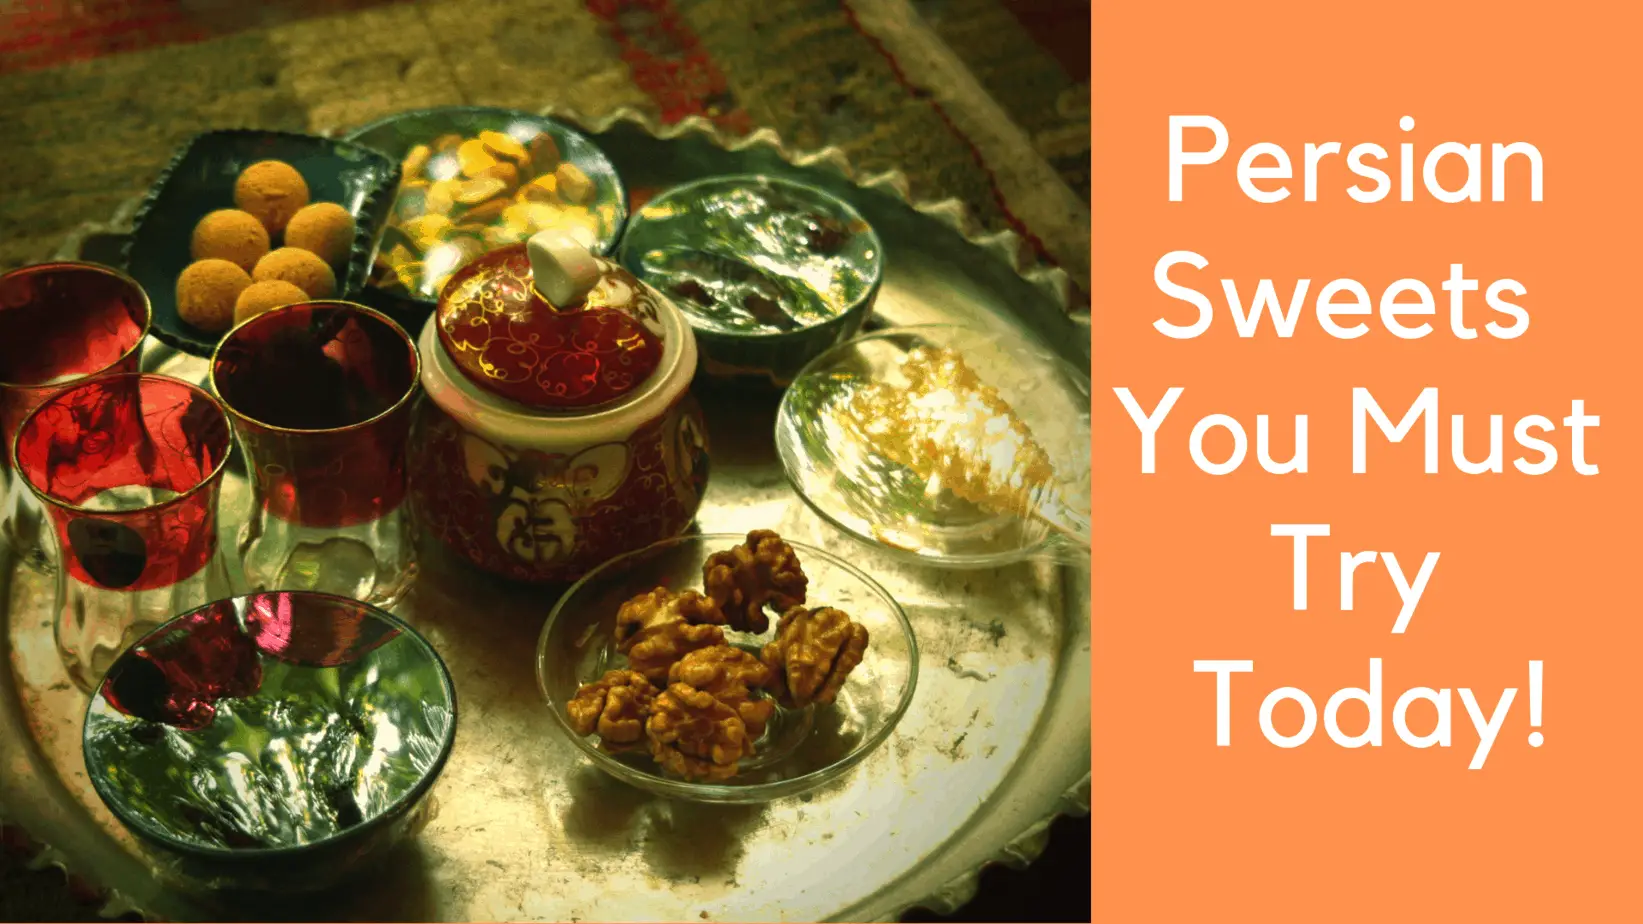 Best Persian Sweets to Try